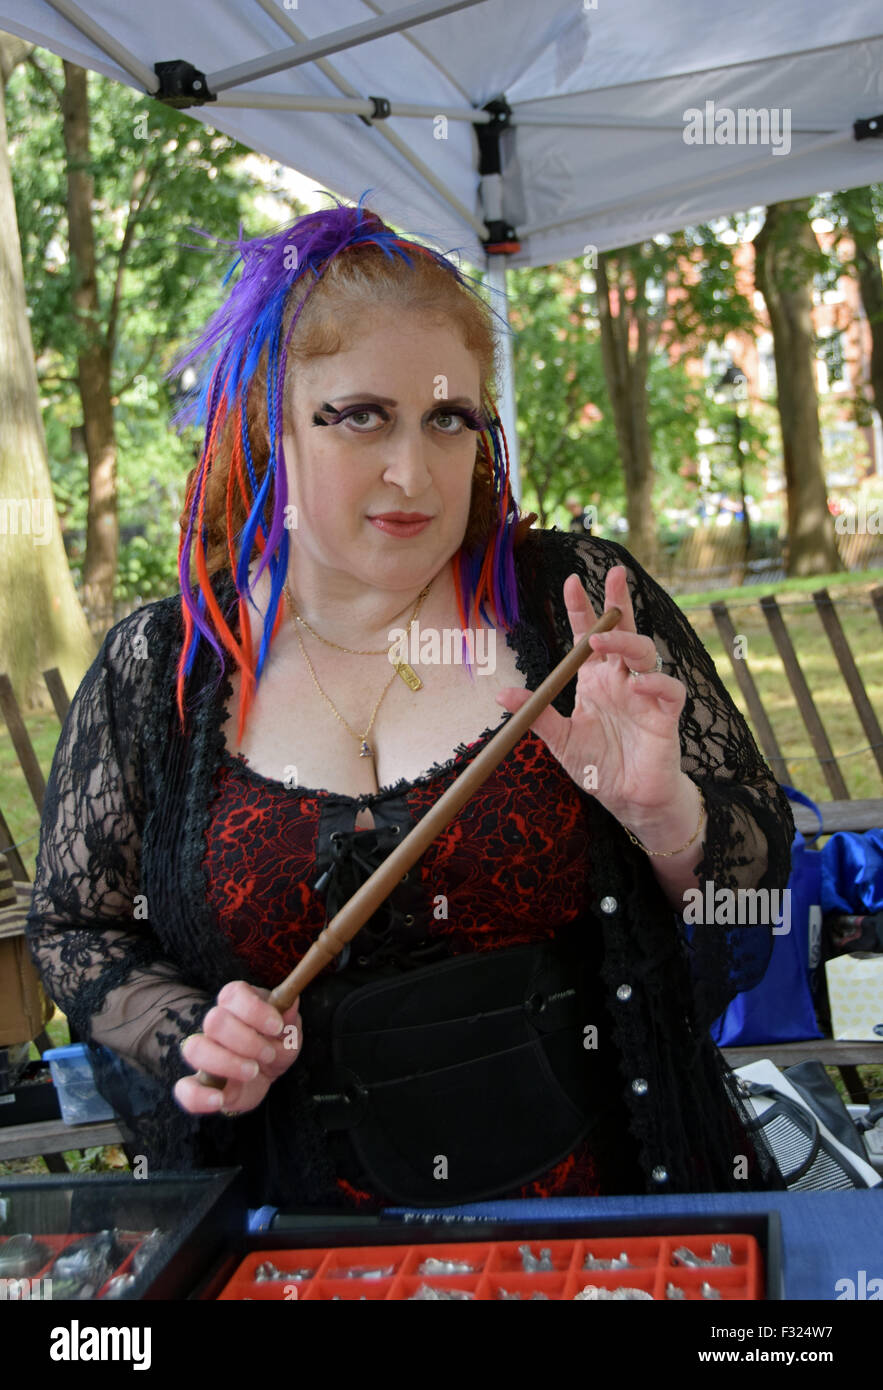 Portrait of jewelry designer Lady Arielle at the Pagan Pride Day Harvest Festival in Washington Square Park in New York City Stock Photo